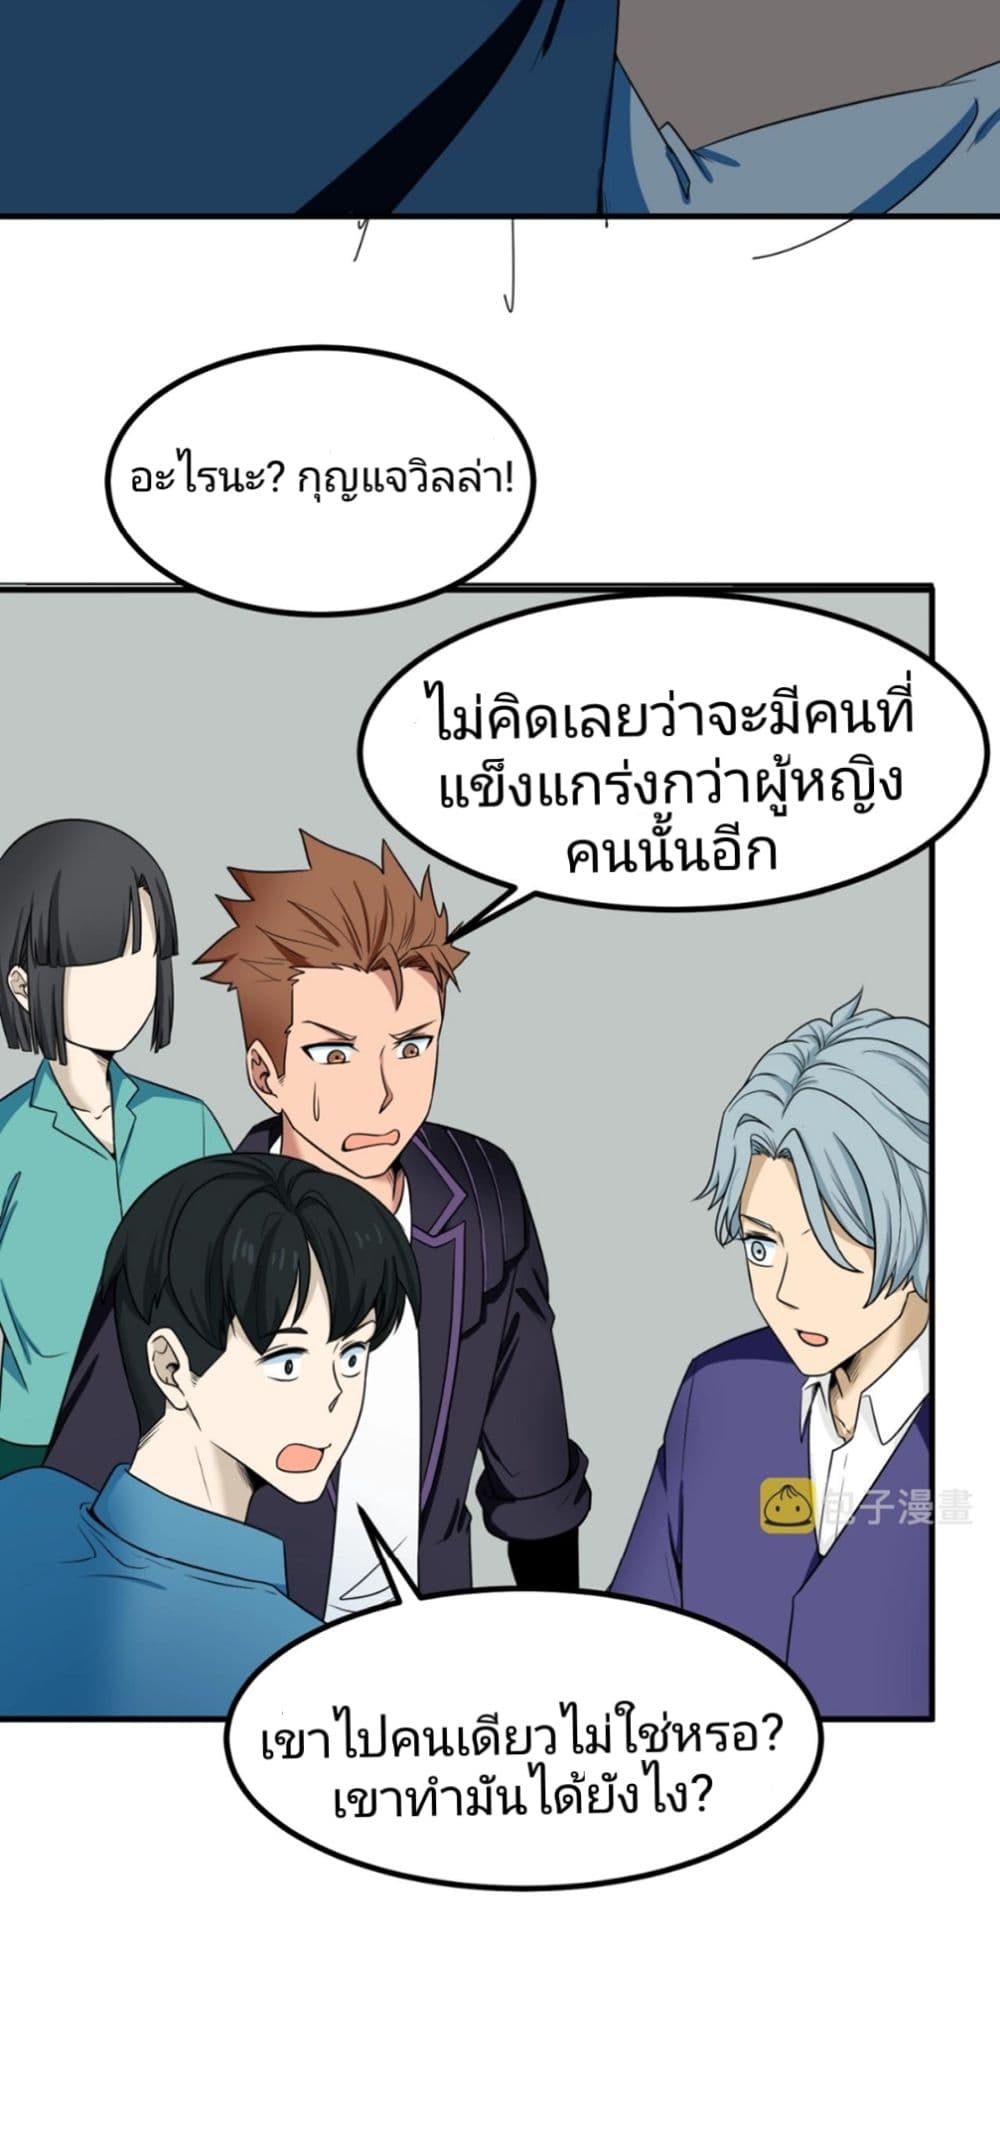 The Age of Ghost Spirits à¸à¸­à¸à¸à¸µà¹ 5 (48)